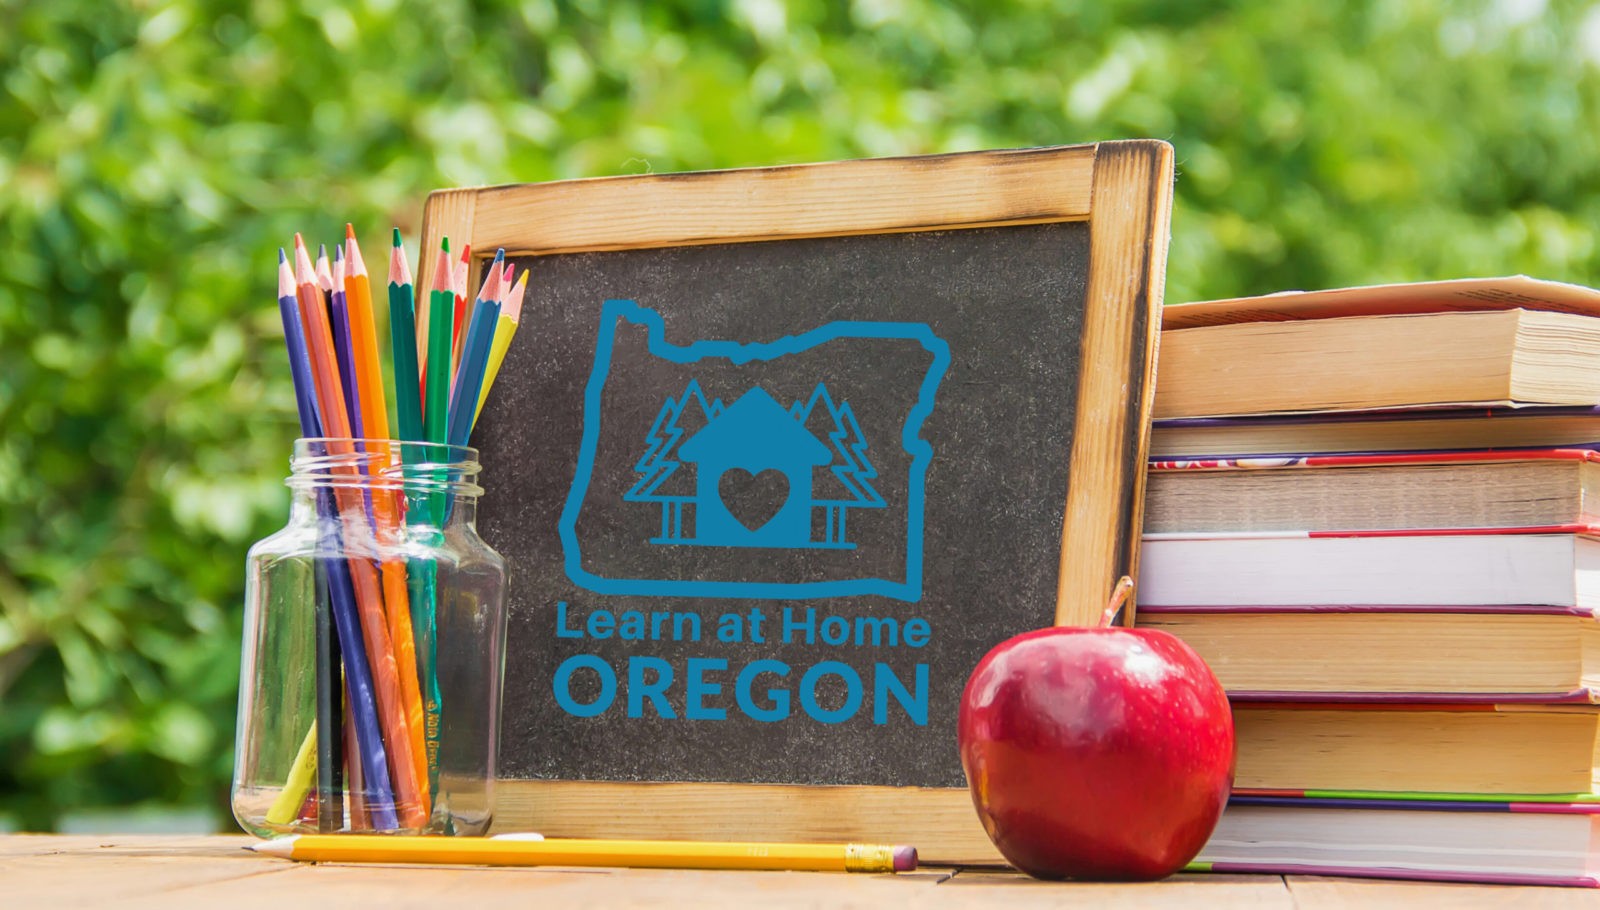 Video Trailer | Learn at Home Oregon